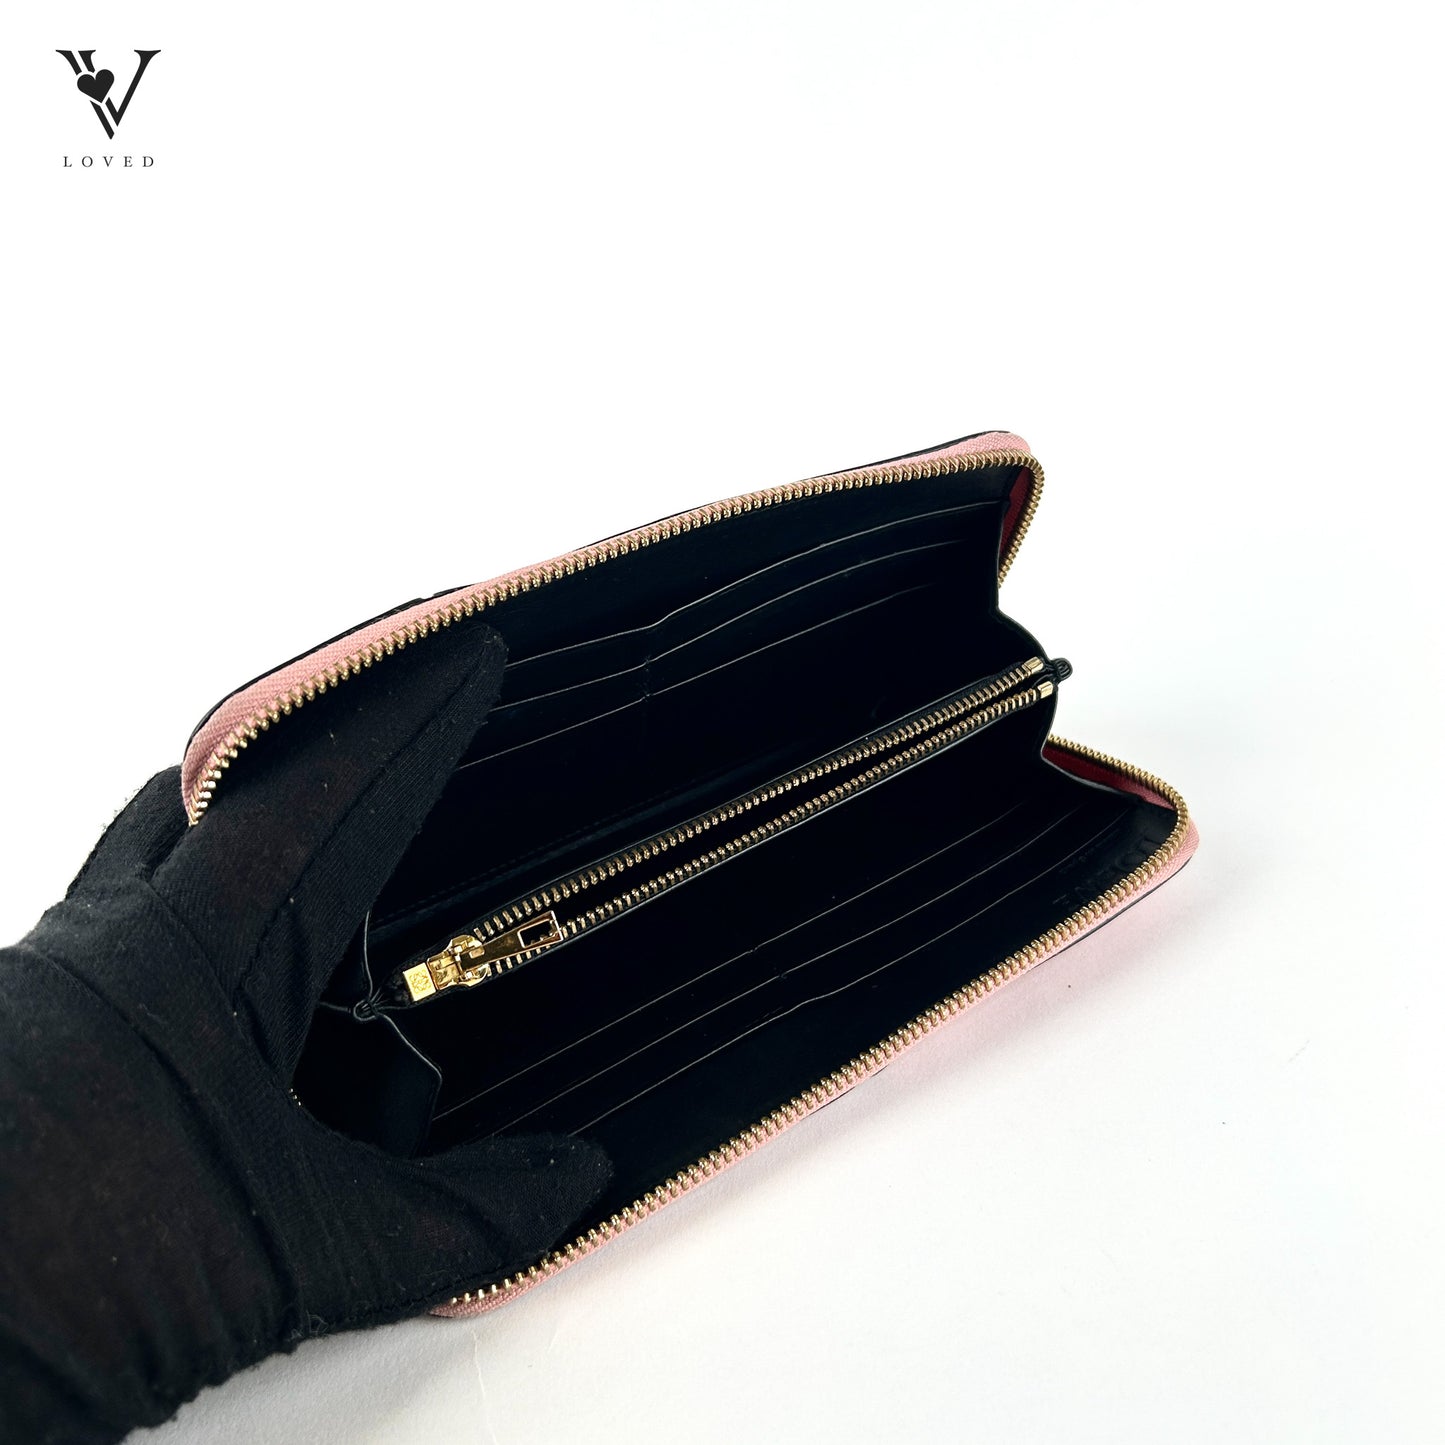 Puzzle Zipped Around Wallet in Classic Calfskin